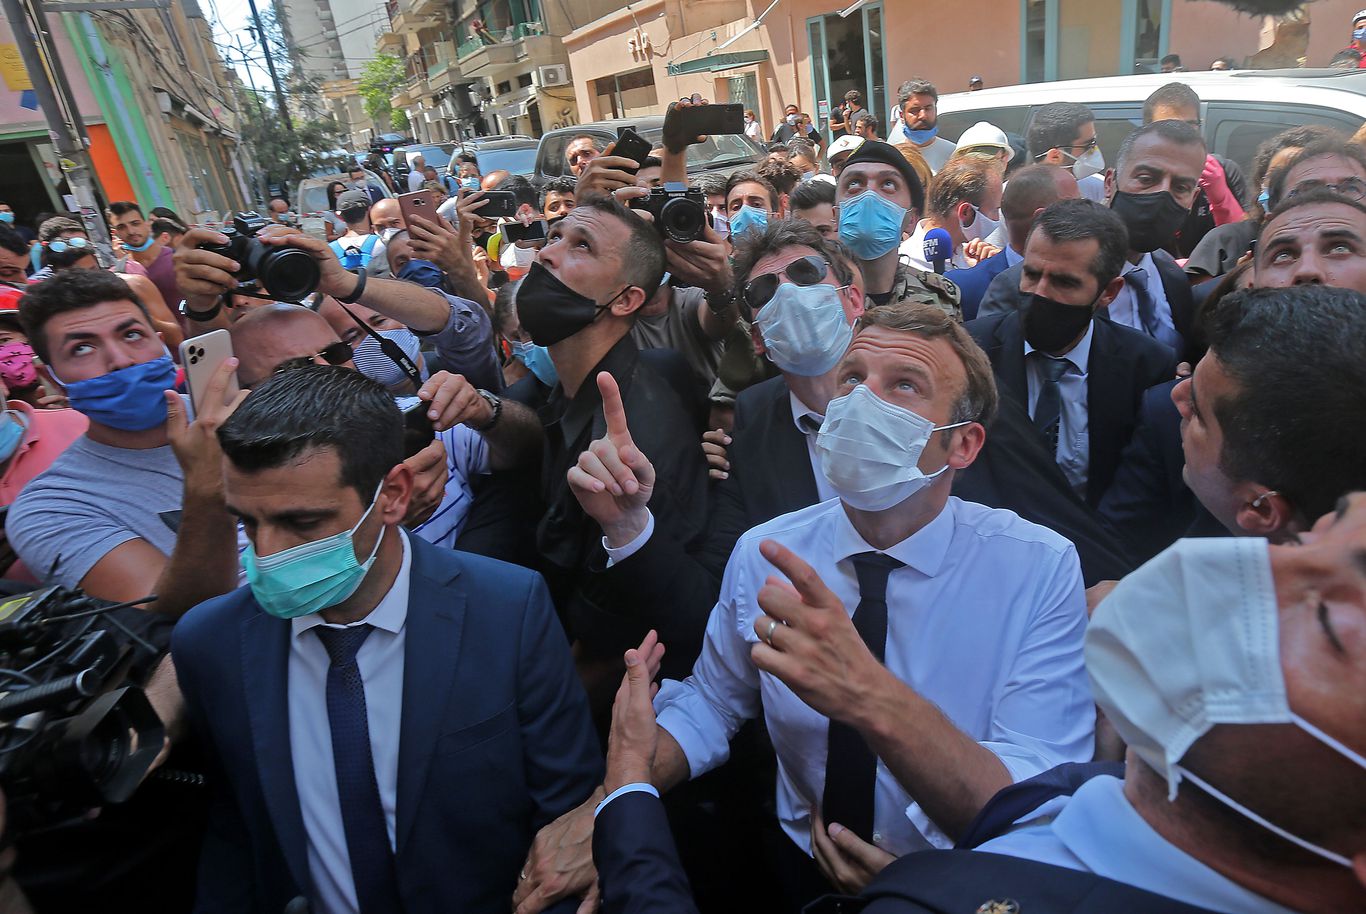 Macron visits Beirut promising a “new political pact” for Lebanon